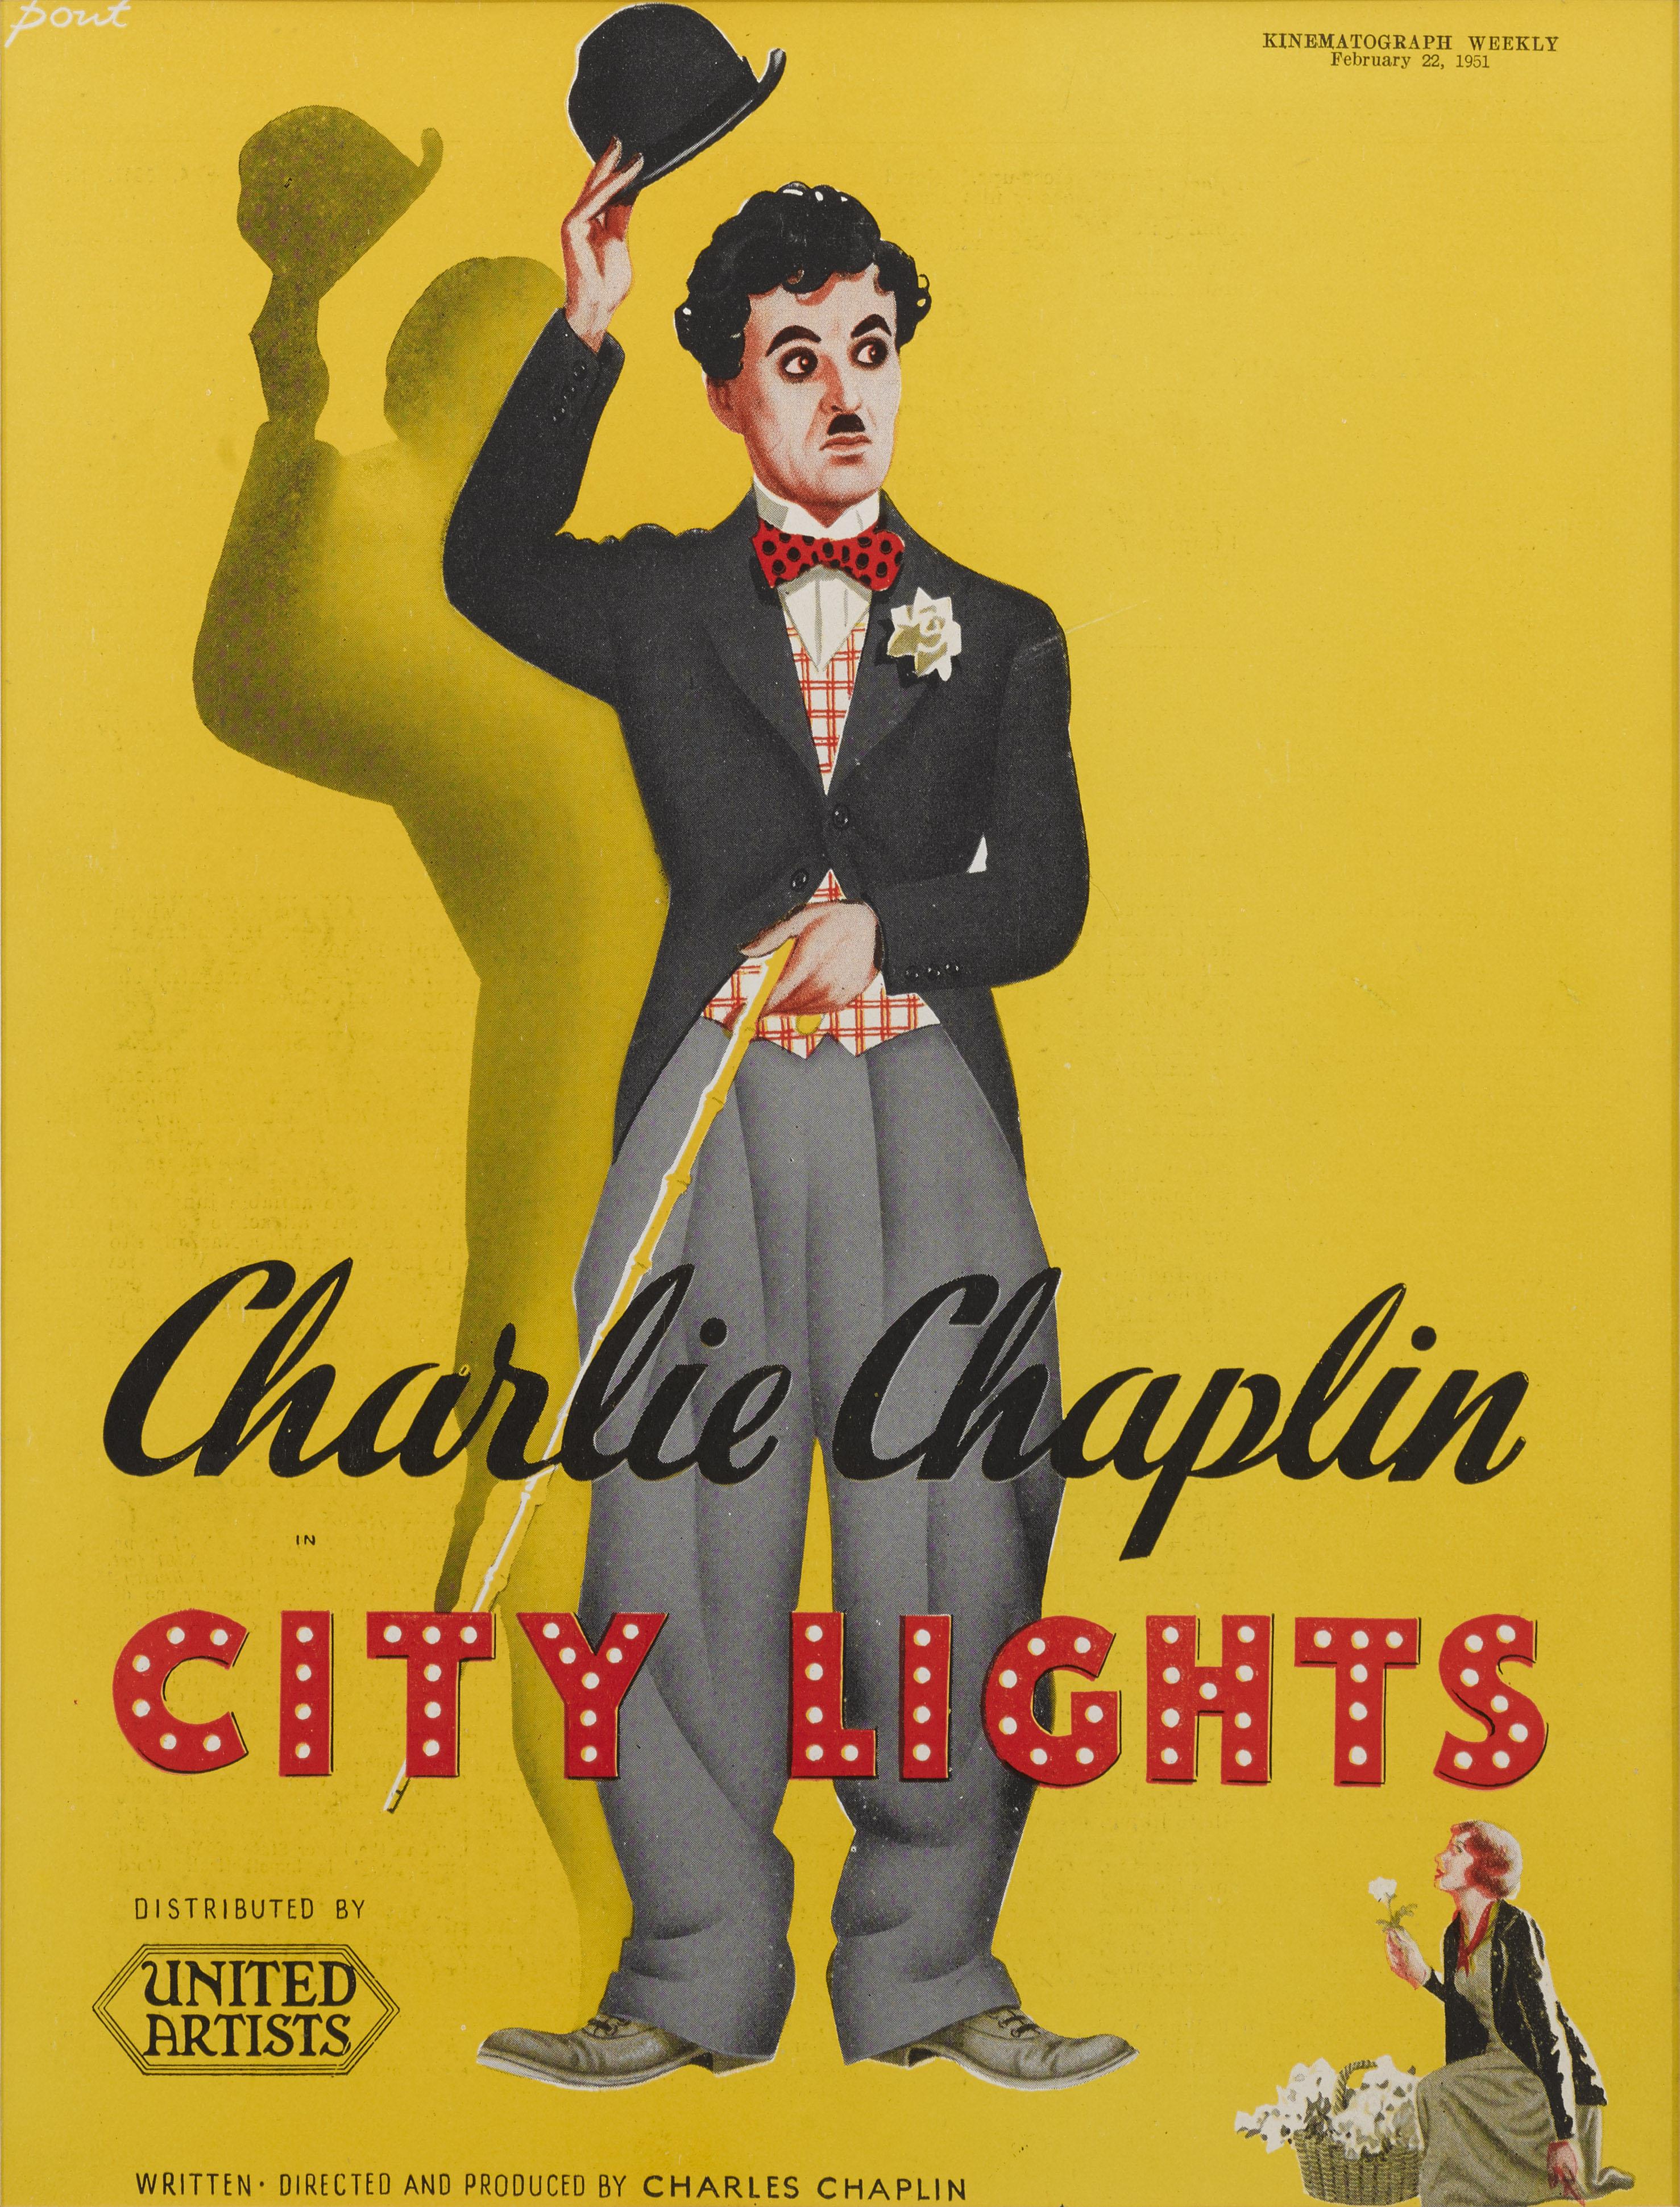 Original British trade advertisement for the 1931 silent Charlie Chaplin comedy romance City Lights.
This trade advertisement was used for the films 1951 rerelease.
The piece is conservation paper backed and conservation framed with UV plexiglass